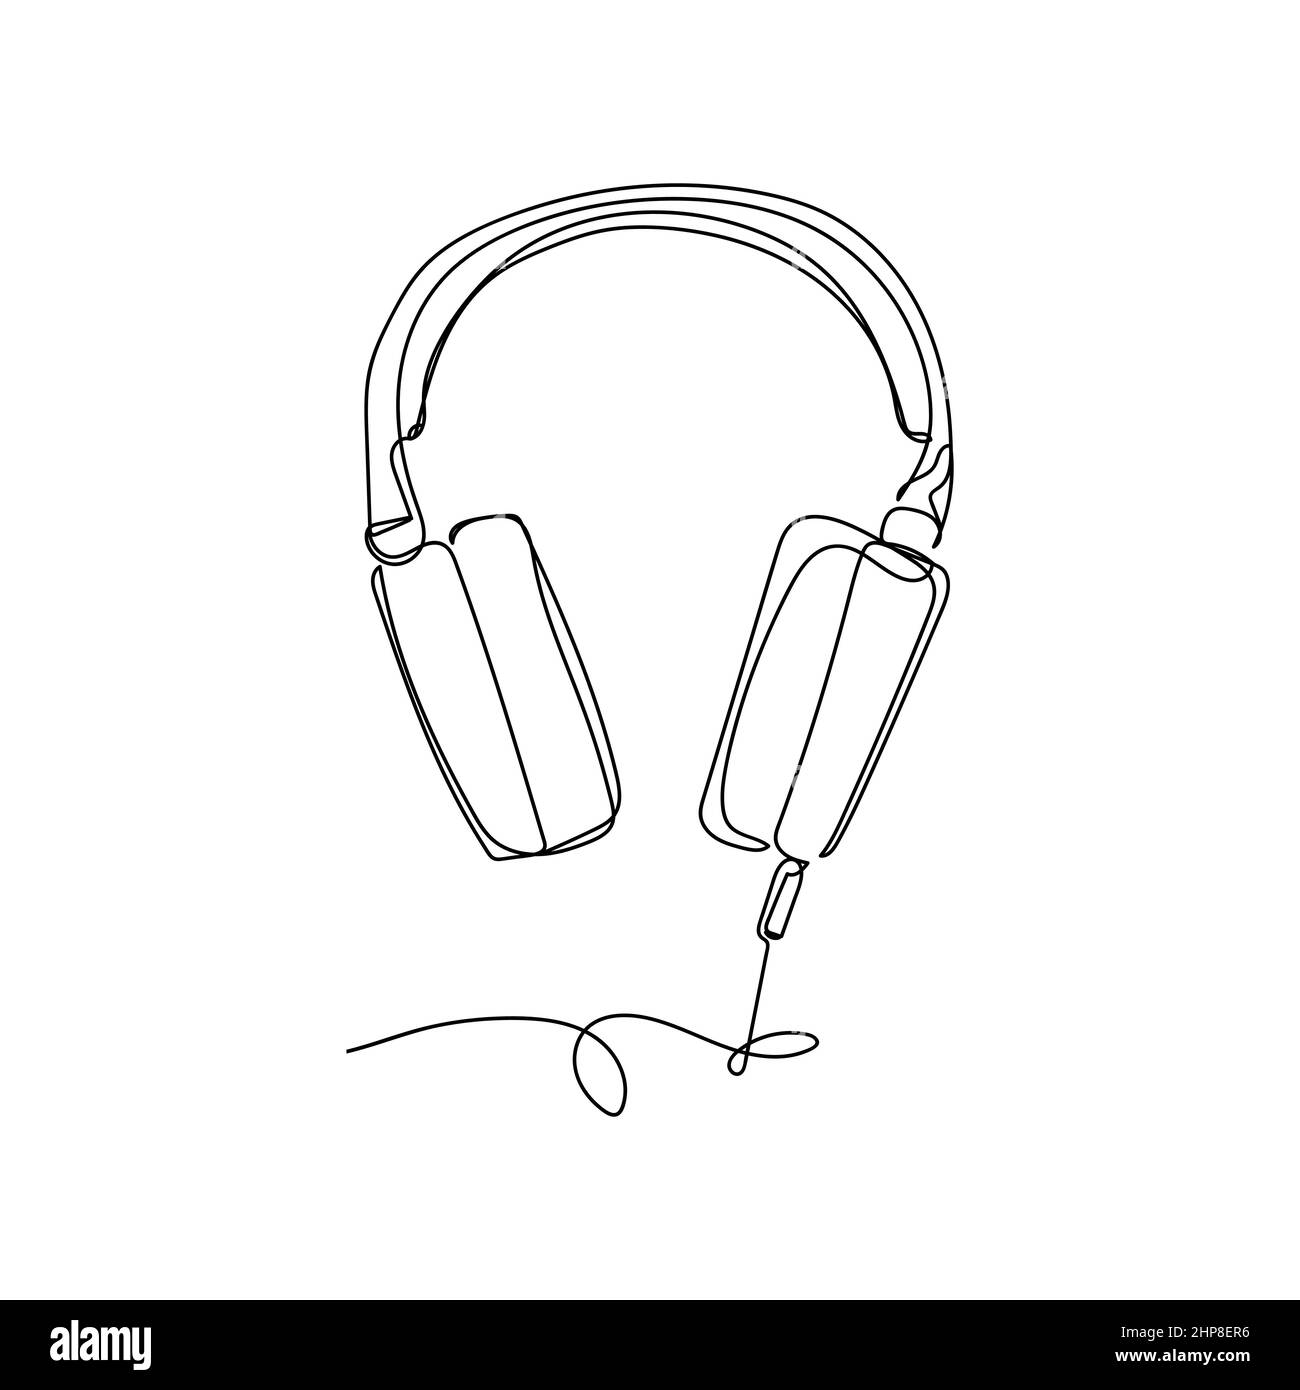 Headphones drawing Black and White Stock Photos & Images - Alamy